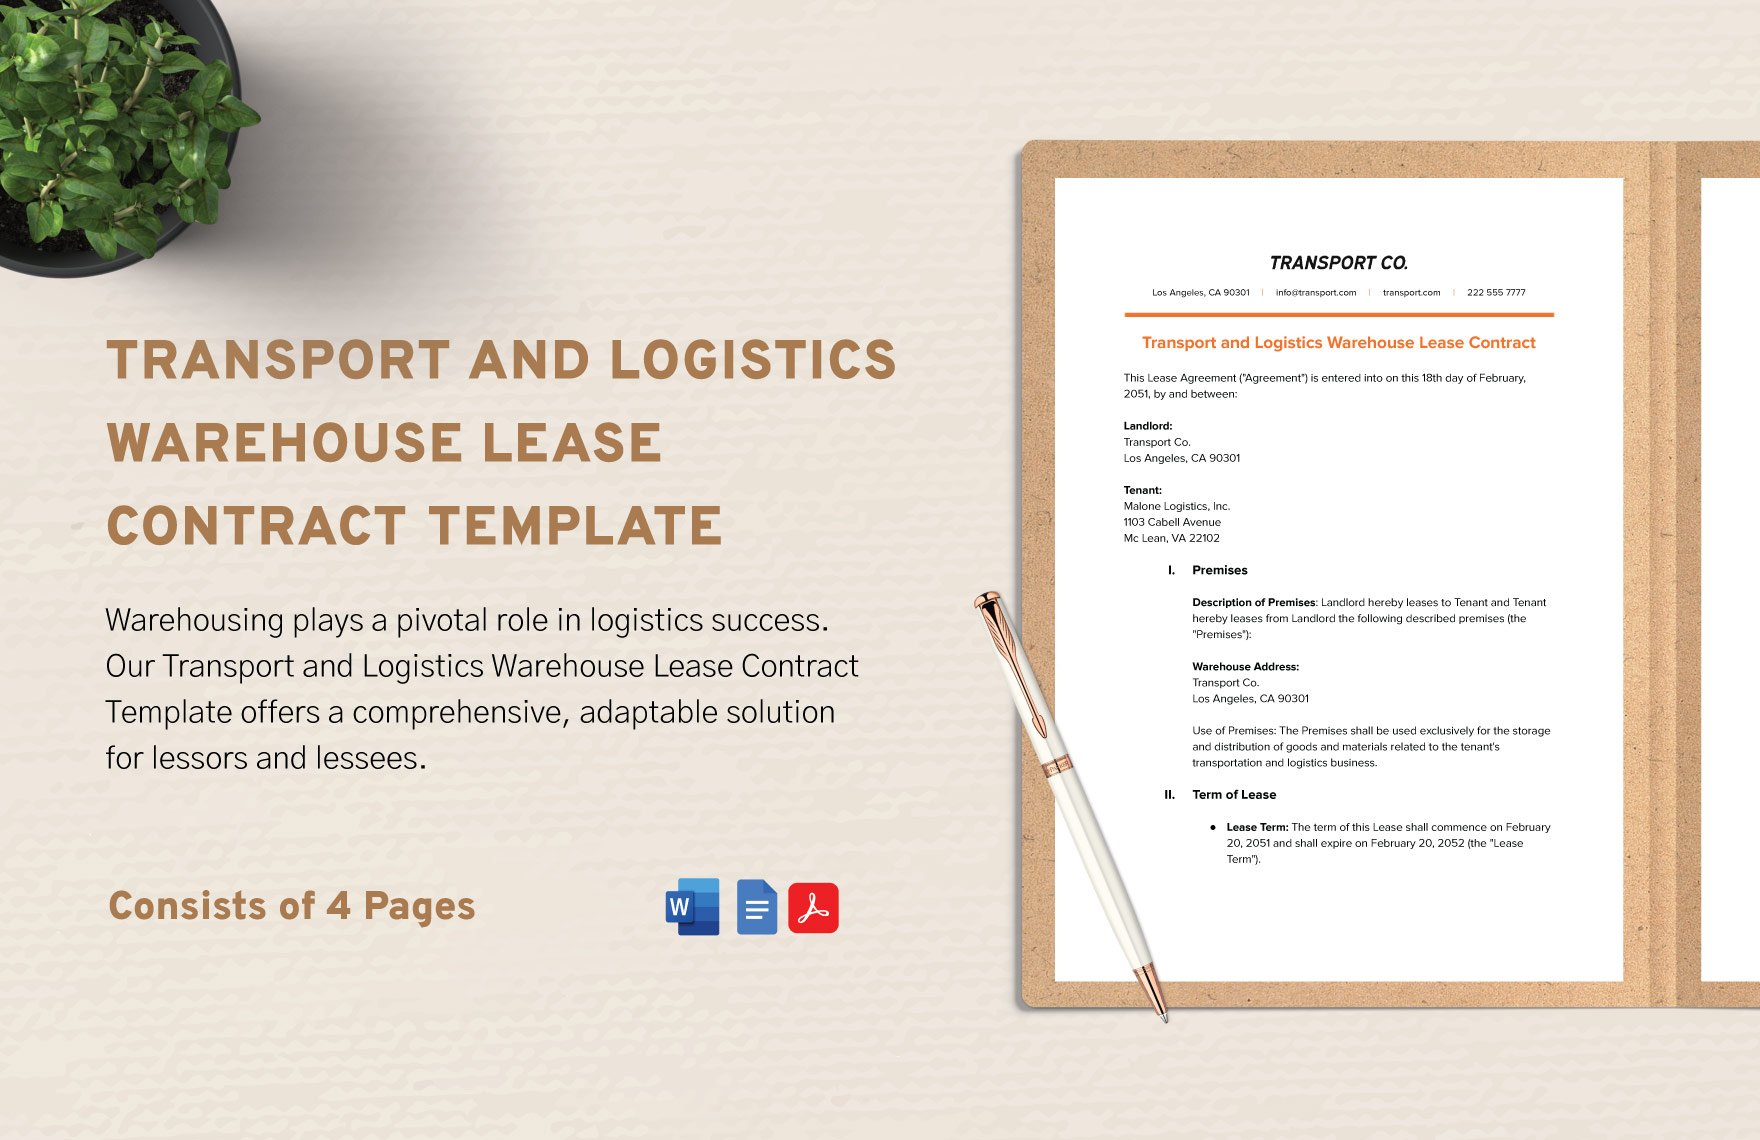 Transport and Logistics Warehouse Lease Contract Template